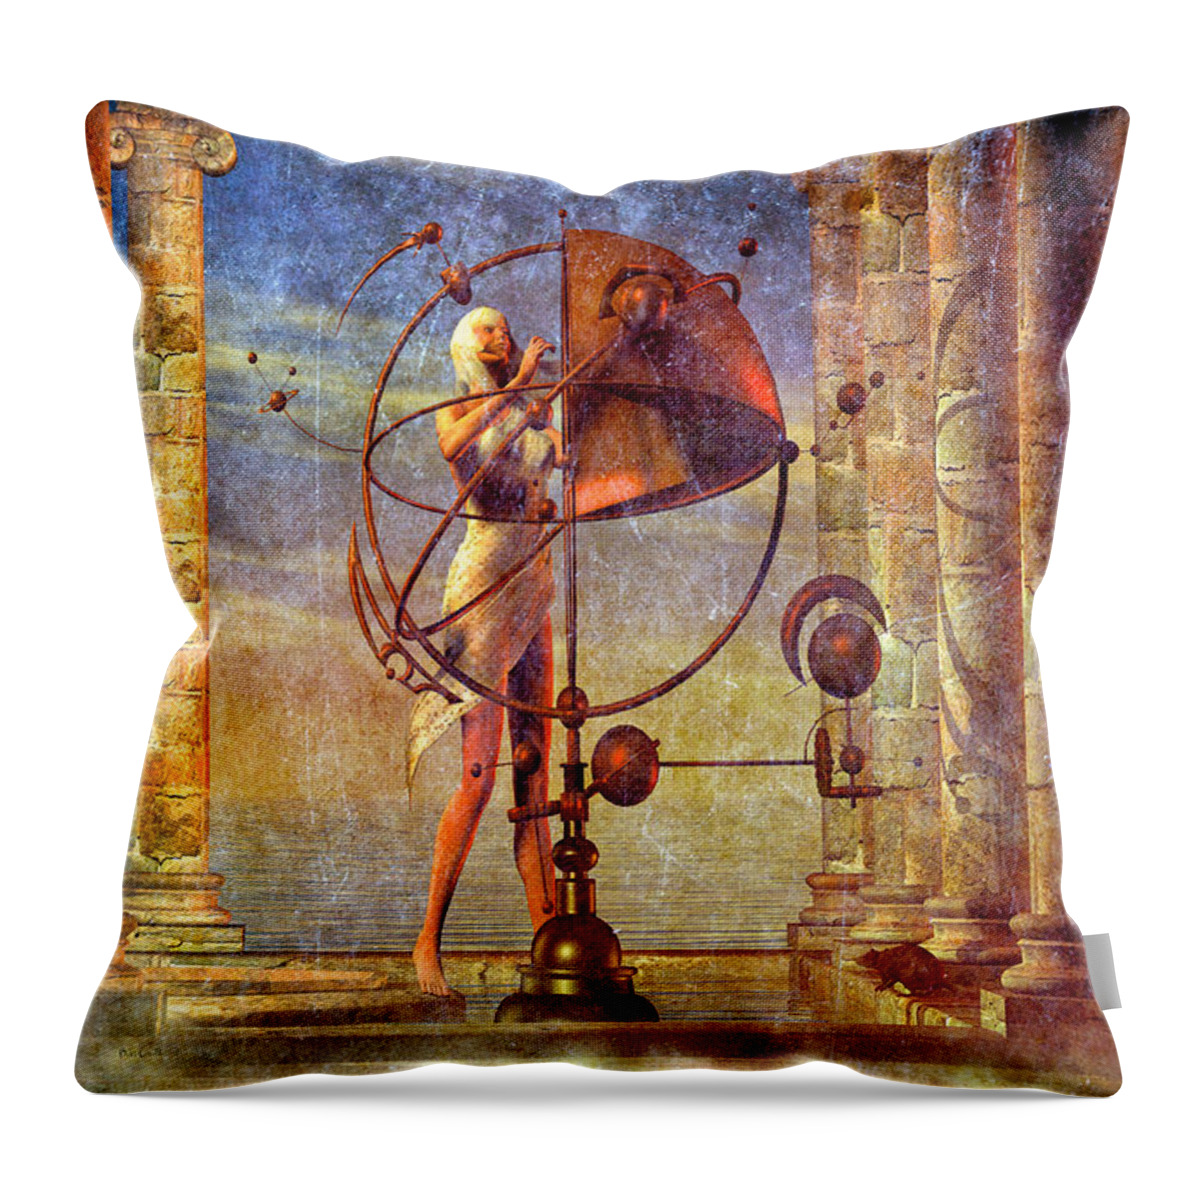 Orrery Throw Pillow featuring the digital art Making Adjustments by Bob Orsillo